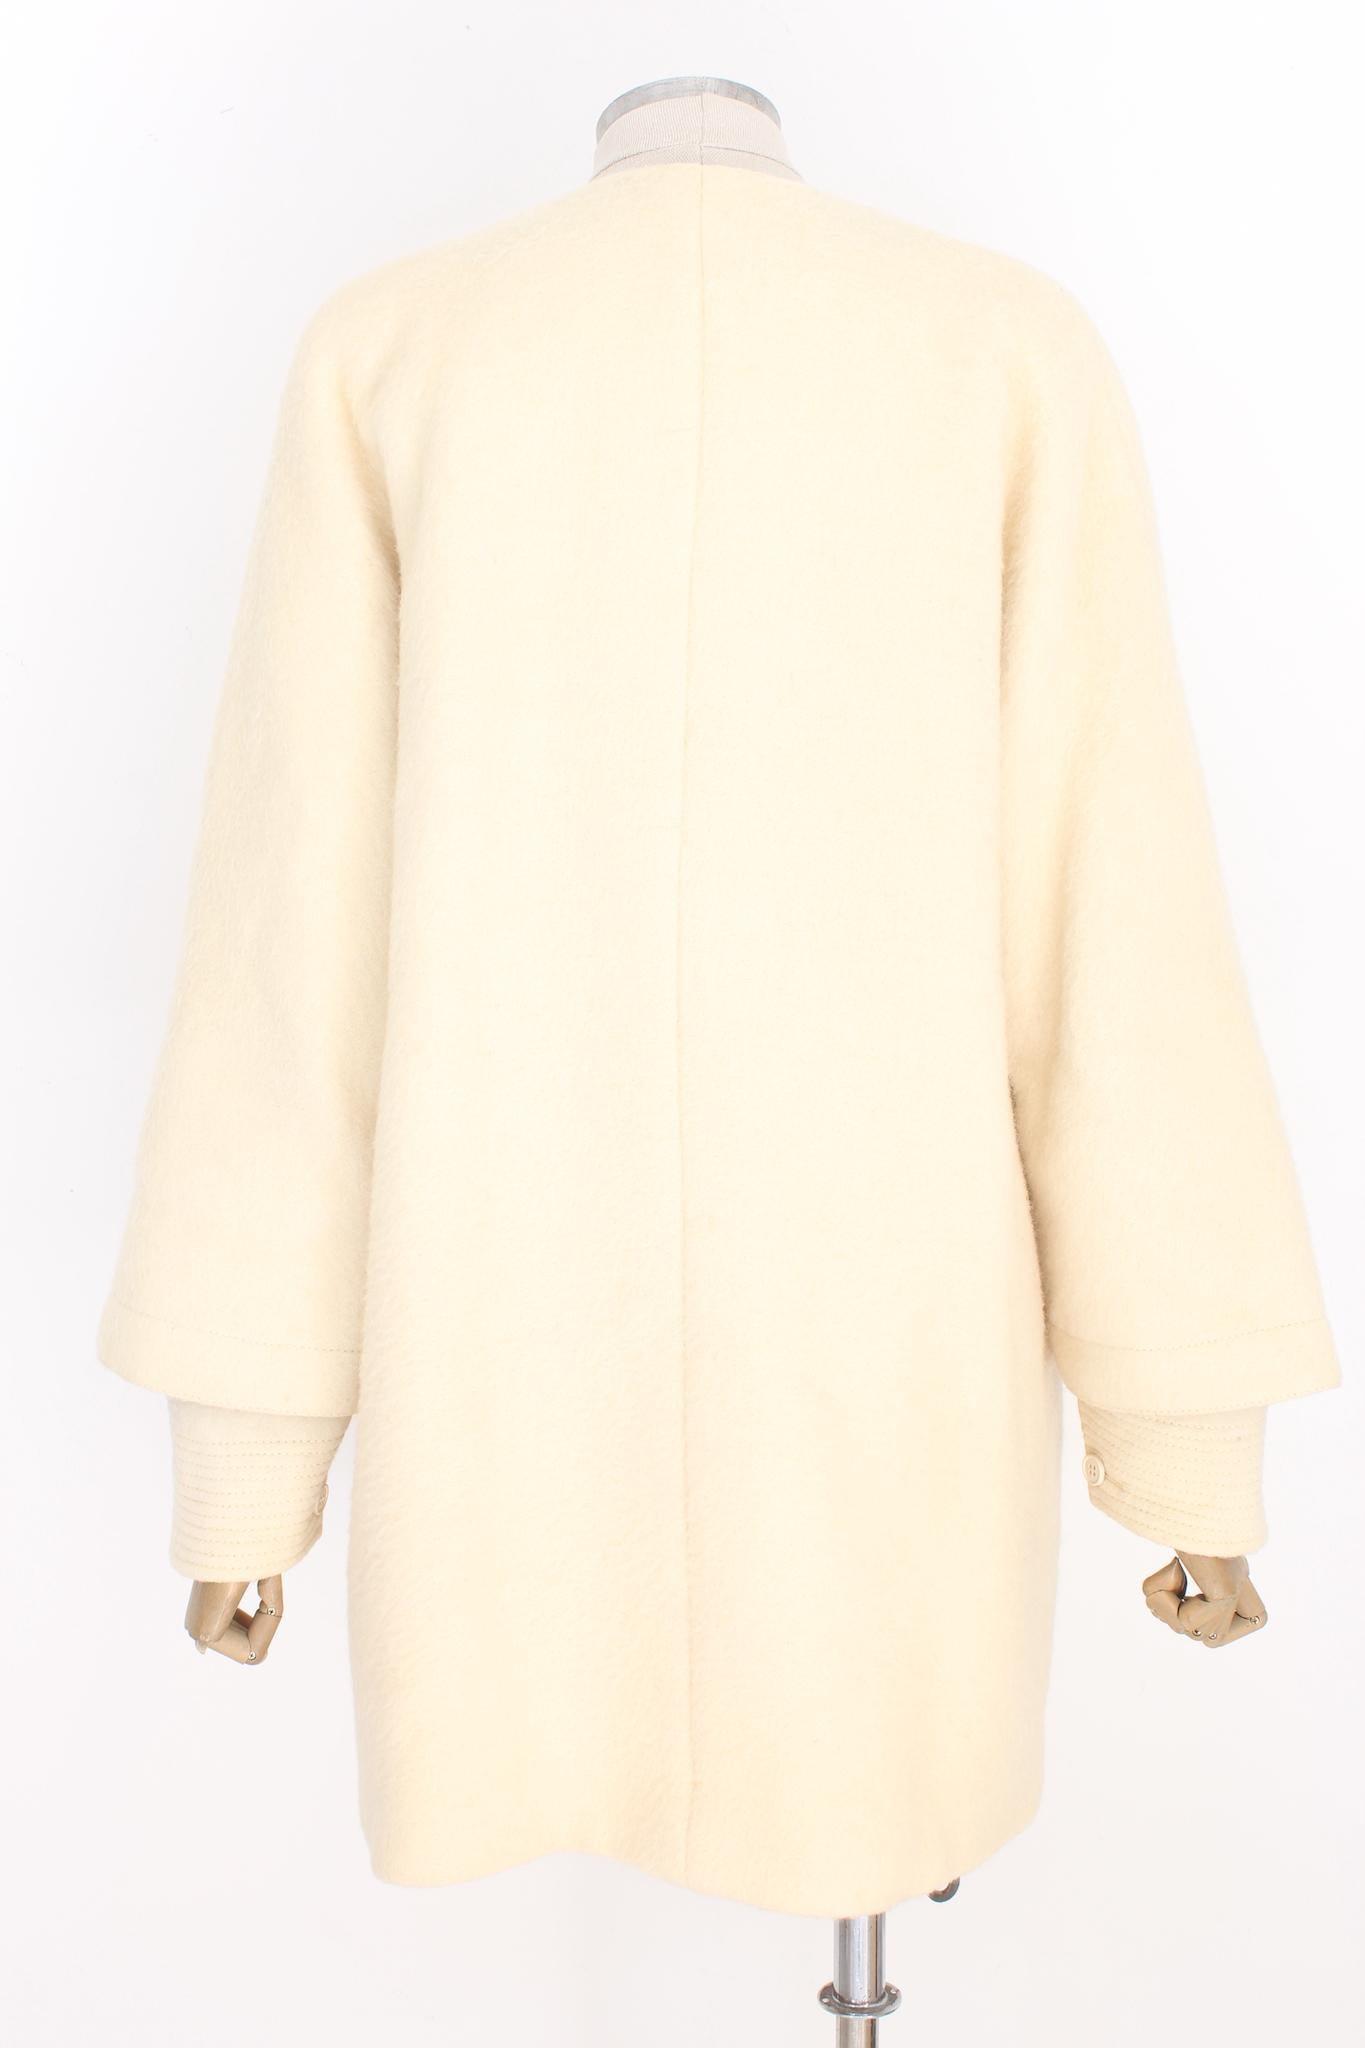 Gianfranco Ferrè oversized vintage 80s coat. Beige colour, crew neck, the sleeves end with a part in quilted fabric. Side pockets. 60% wool, 40% mohair fabric, internally lined. Made in Italy.

Size: 46 It 12 Us 14 Uk

Shoulder: 46 cm
Bust/Chest: 59